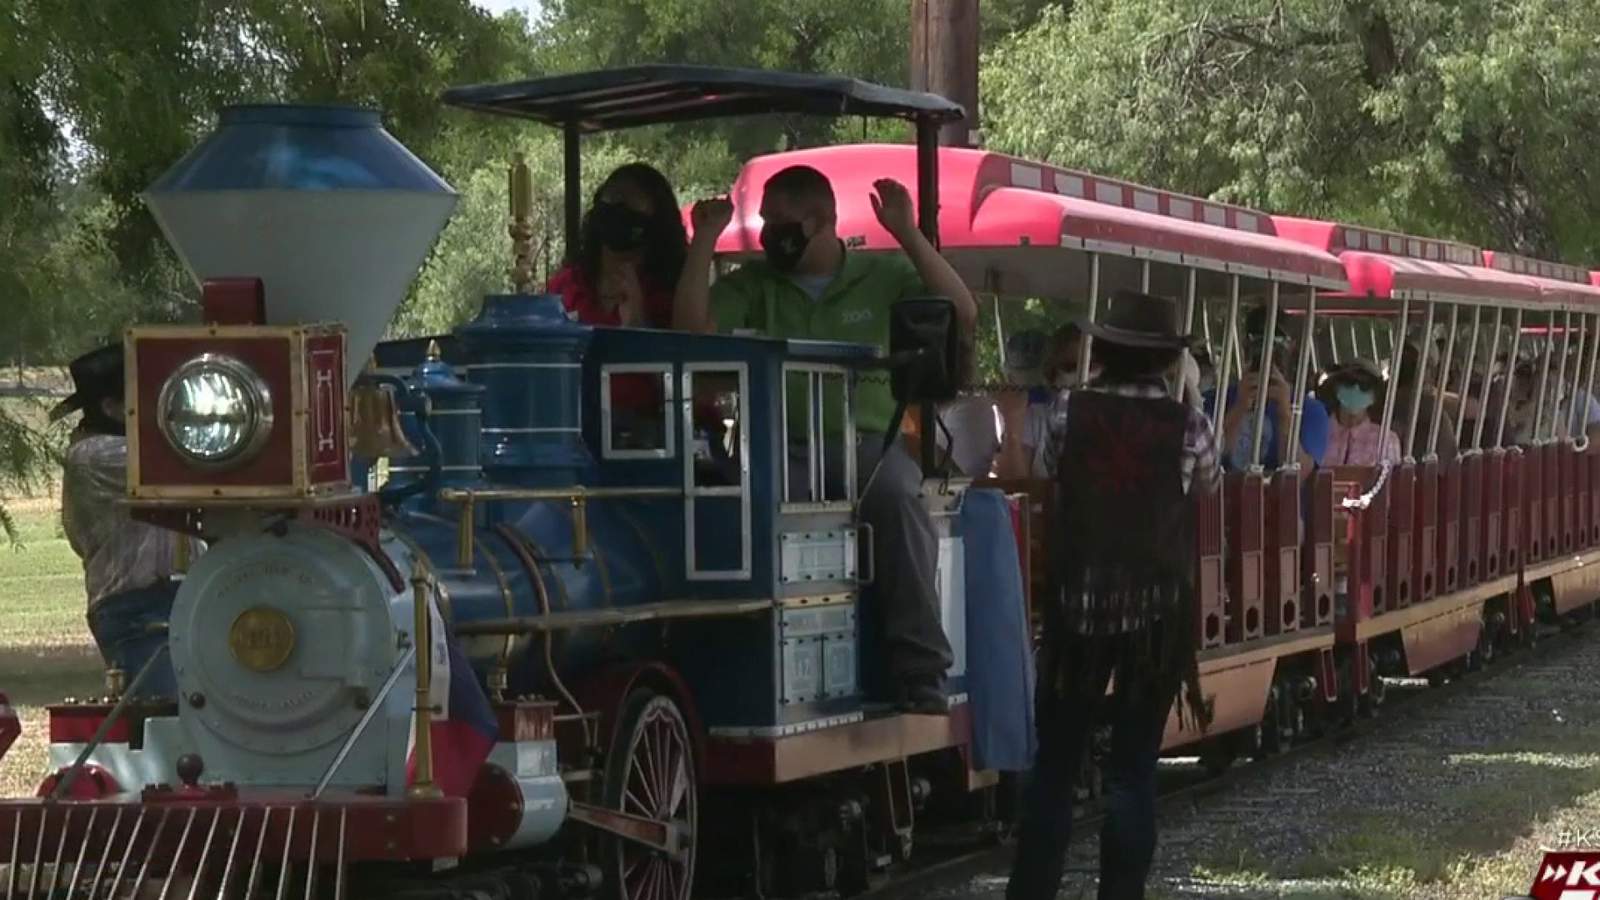 Train robbery anniversary commemorated with reenactments to raise funds for San Antonio Zoo